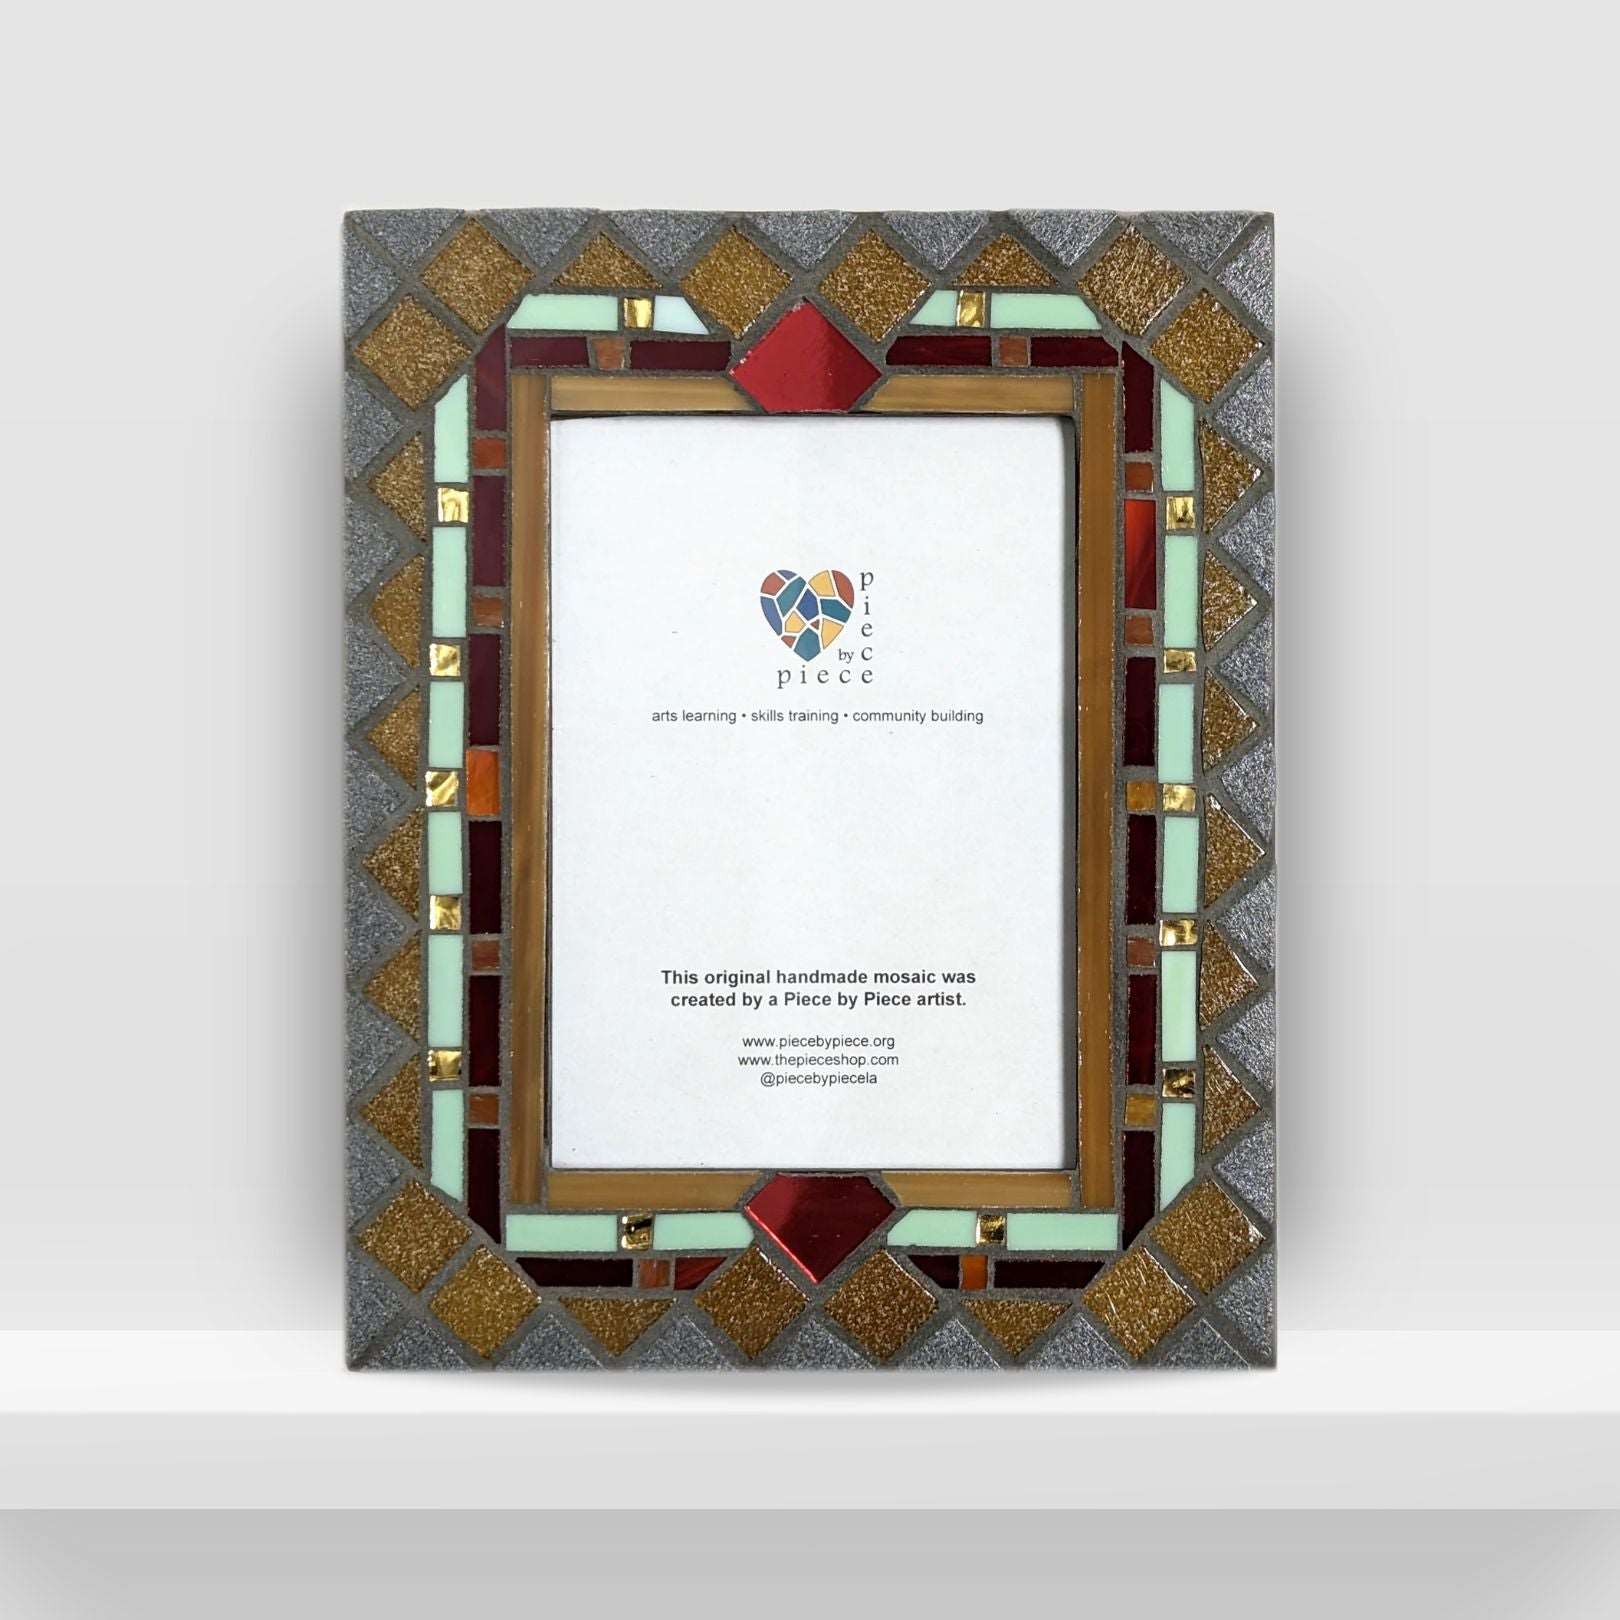 Jewel-toned mosaic frame with gold details.